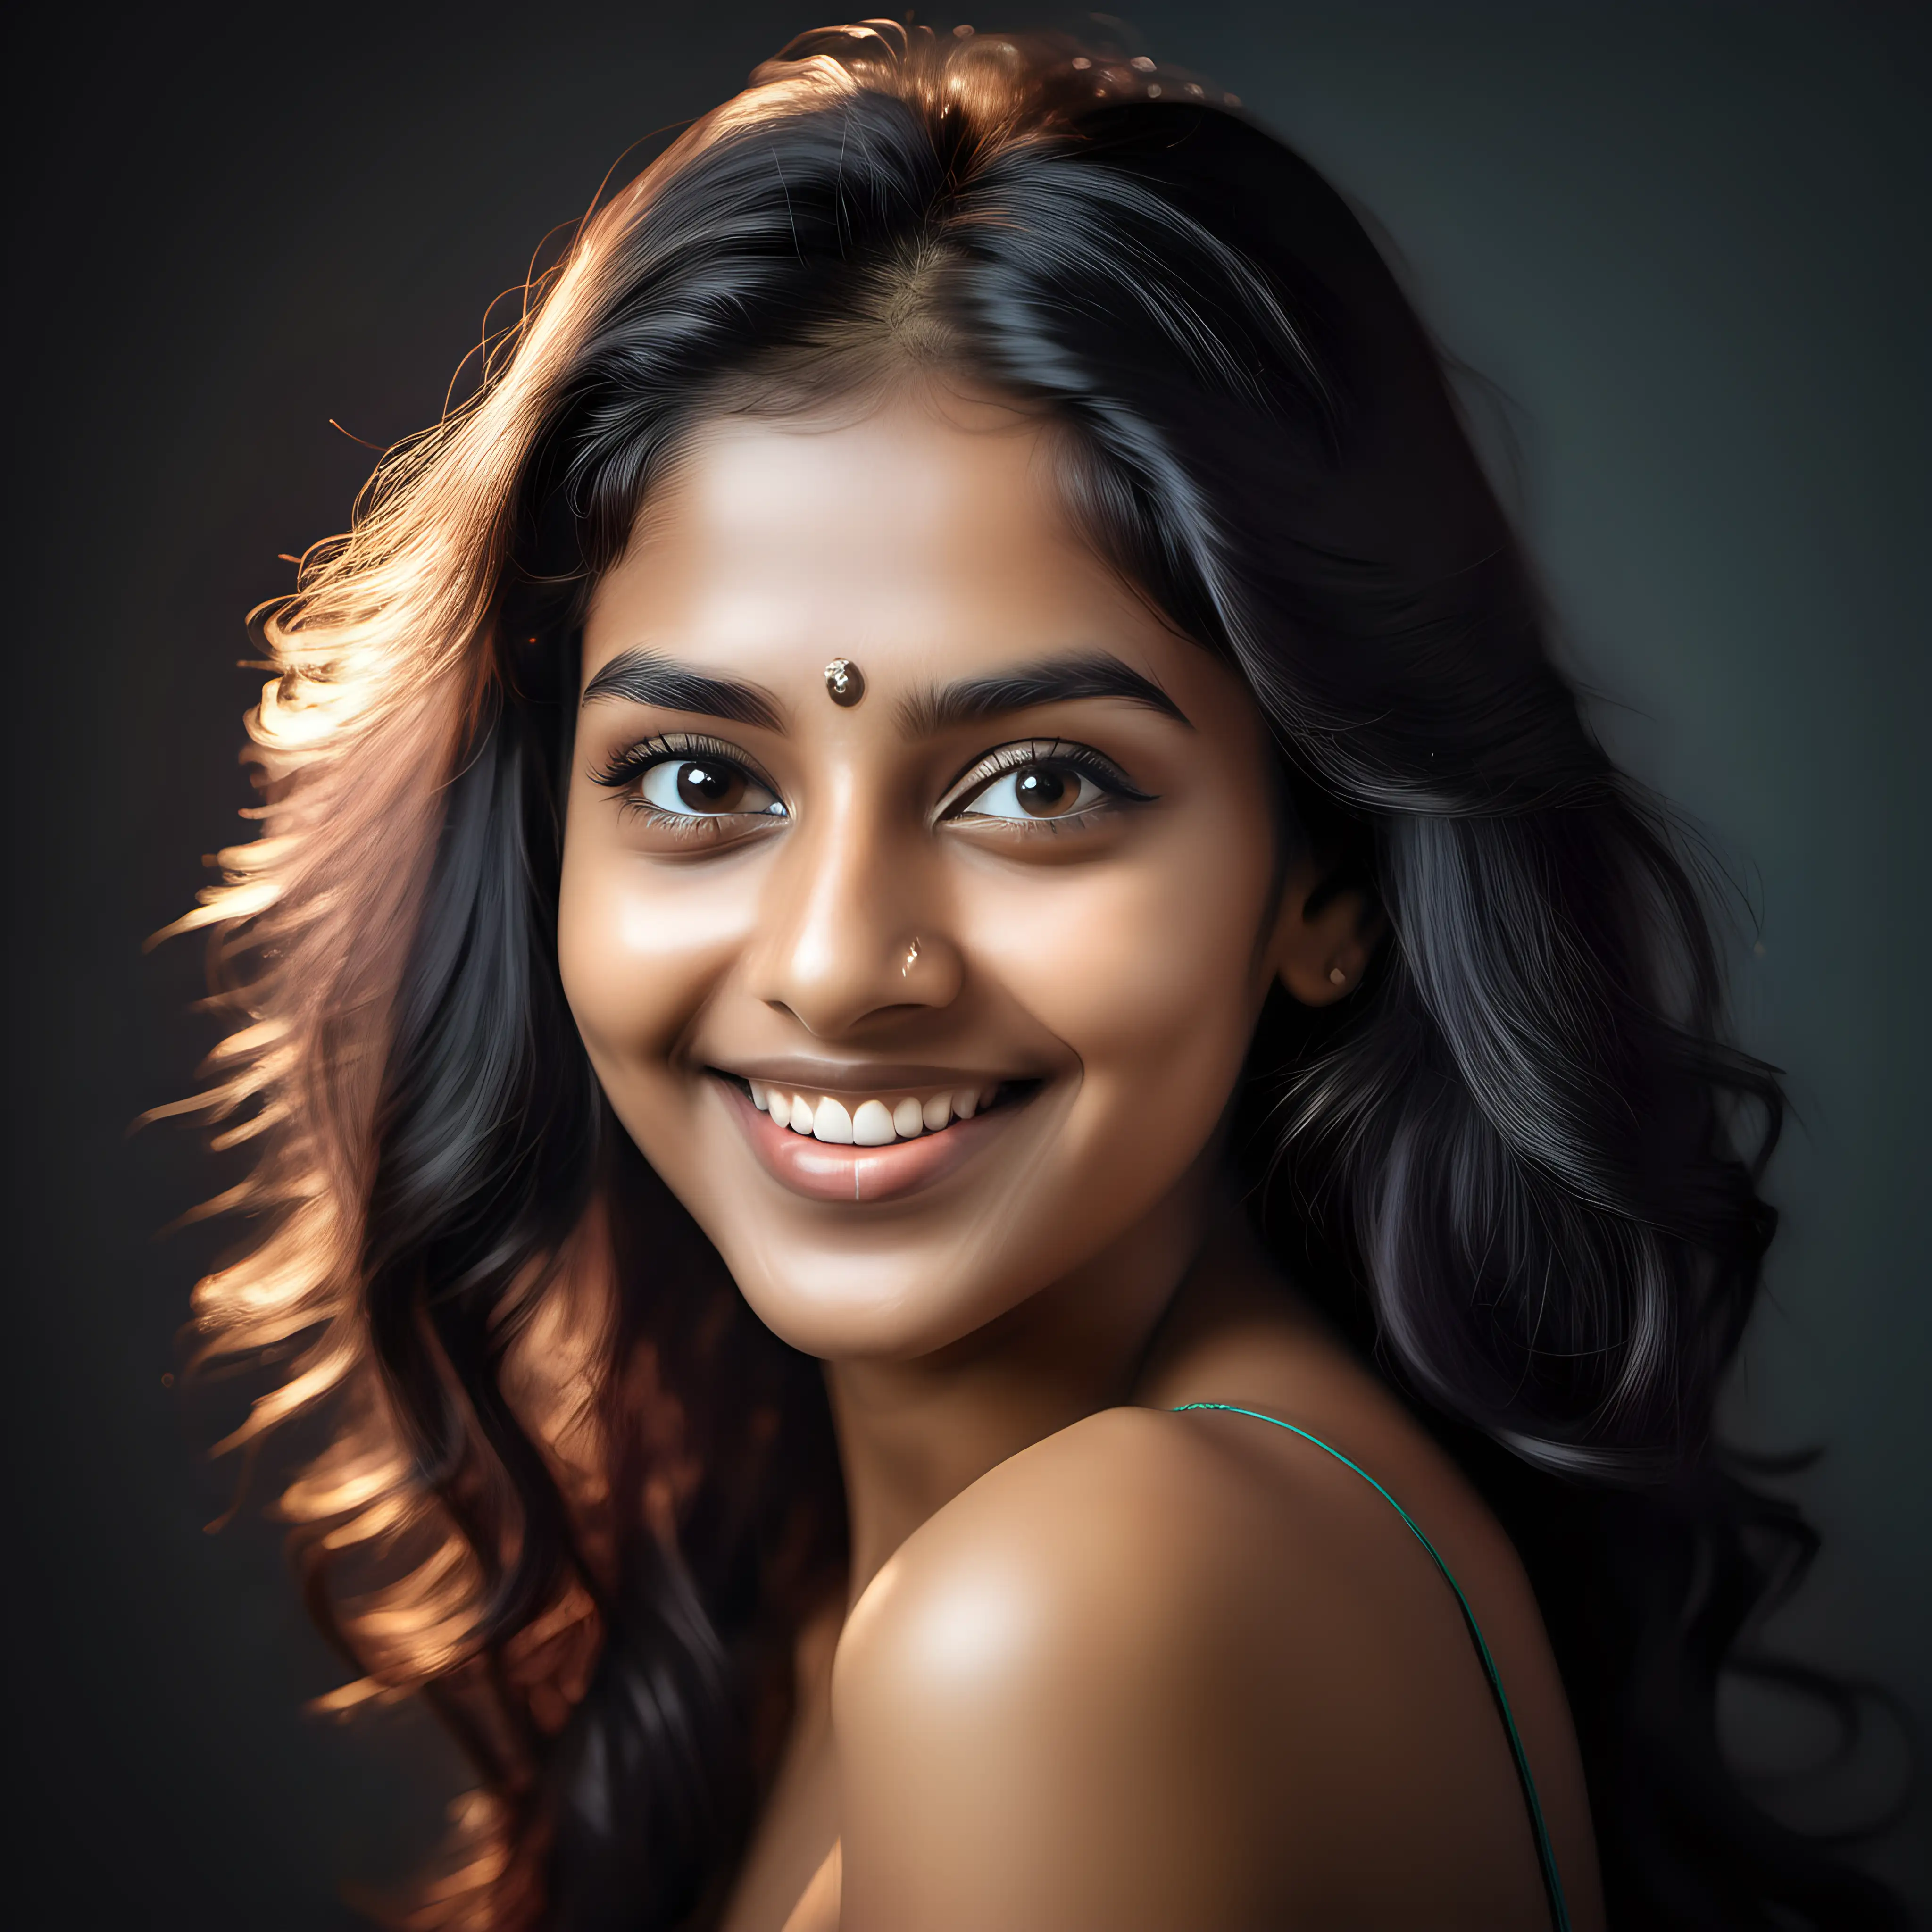 a portrait of young indian looking georgous lady with bright glowing skin, fairy hair, warm smile portrait photo with   clear skin and clean hair